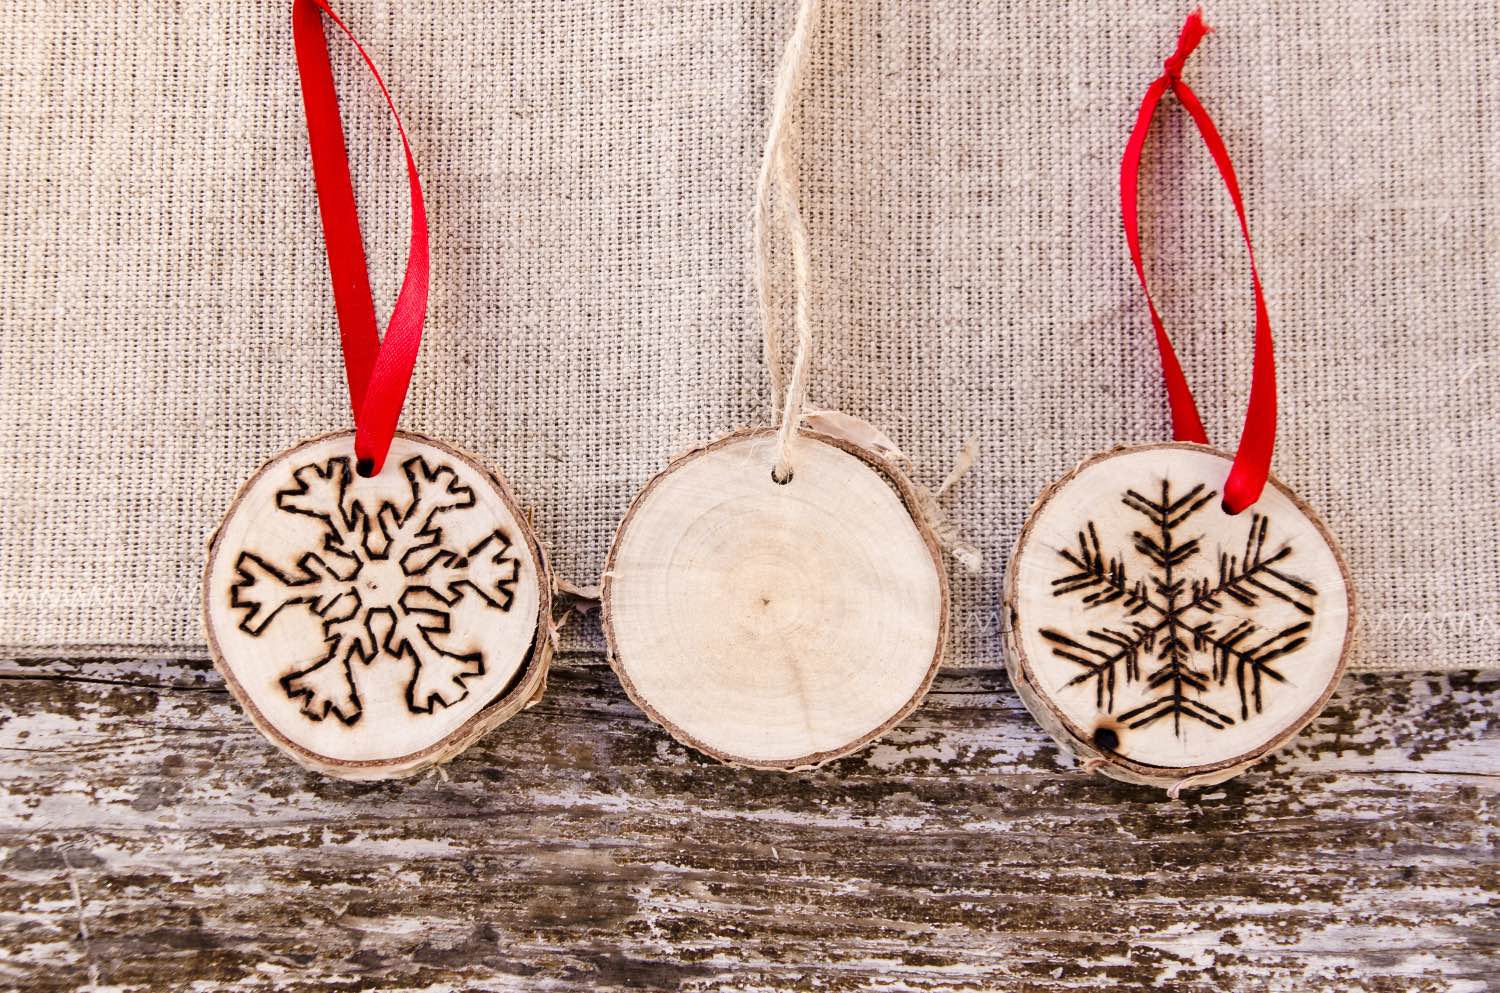 wood burned holiday ornaments diy for craft in style